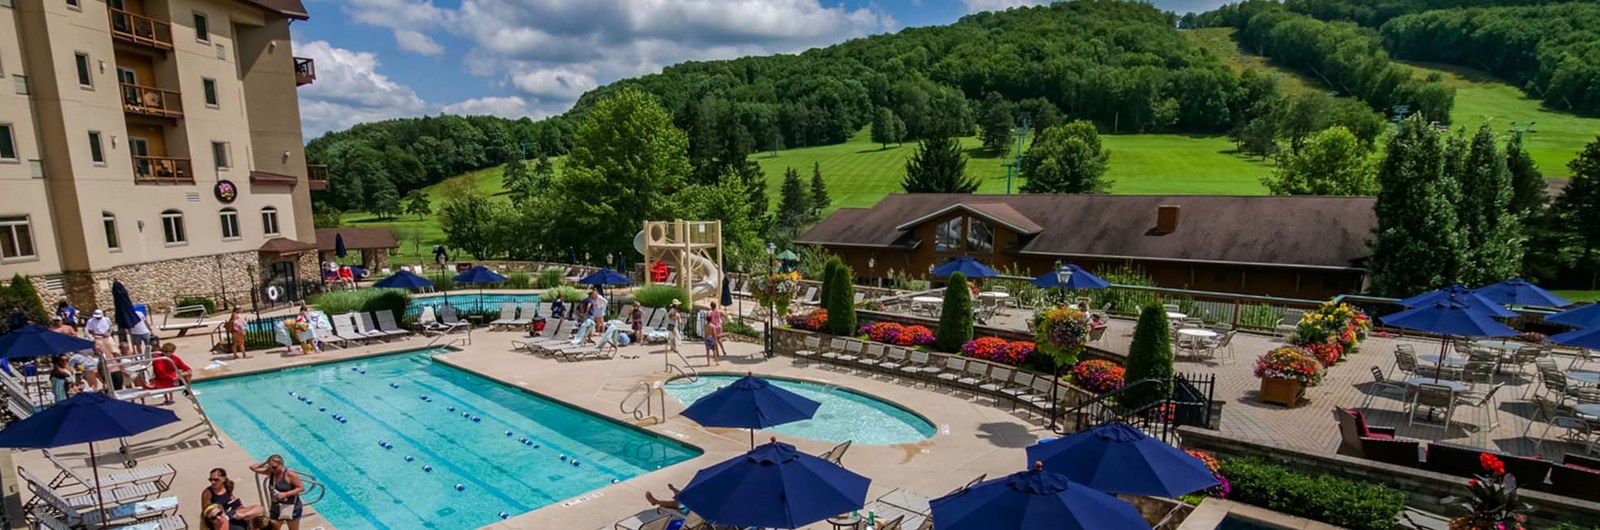 Overhead view of the pool complex at Holiday Valley with a view of the hills in the background